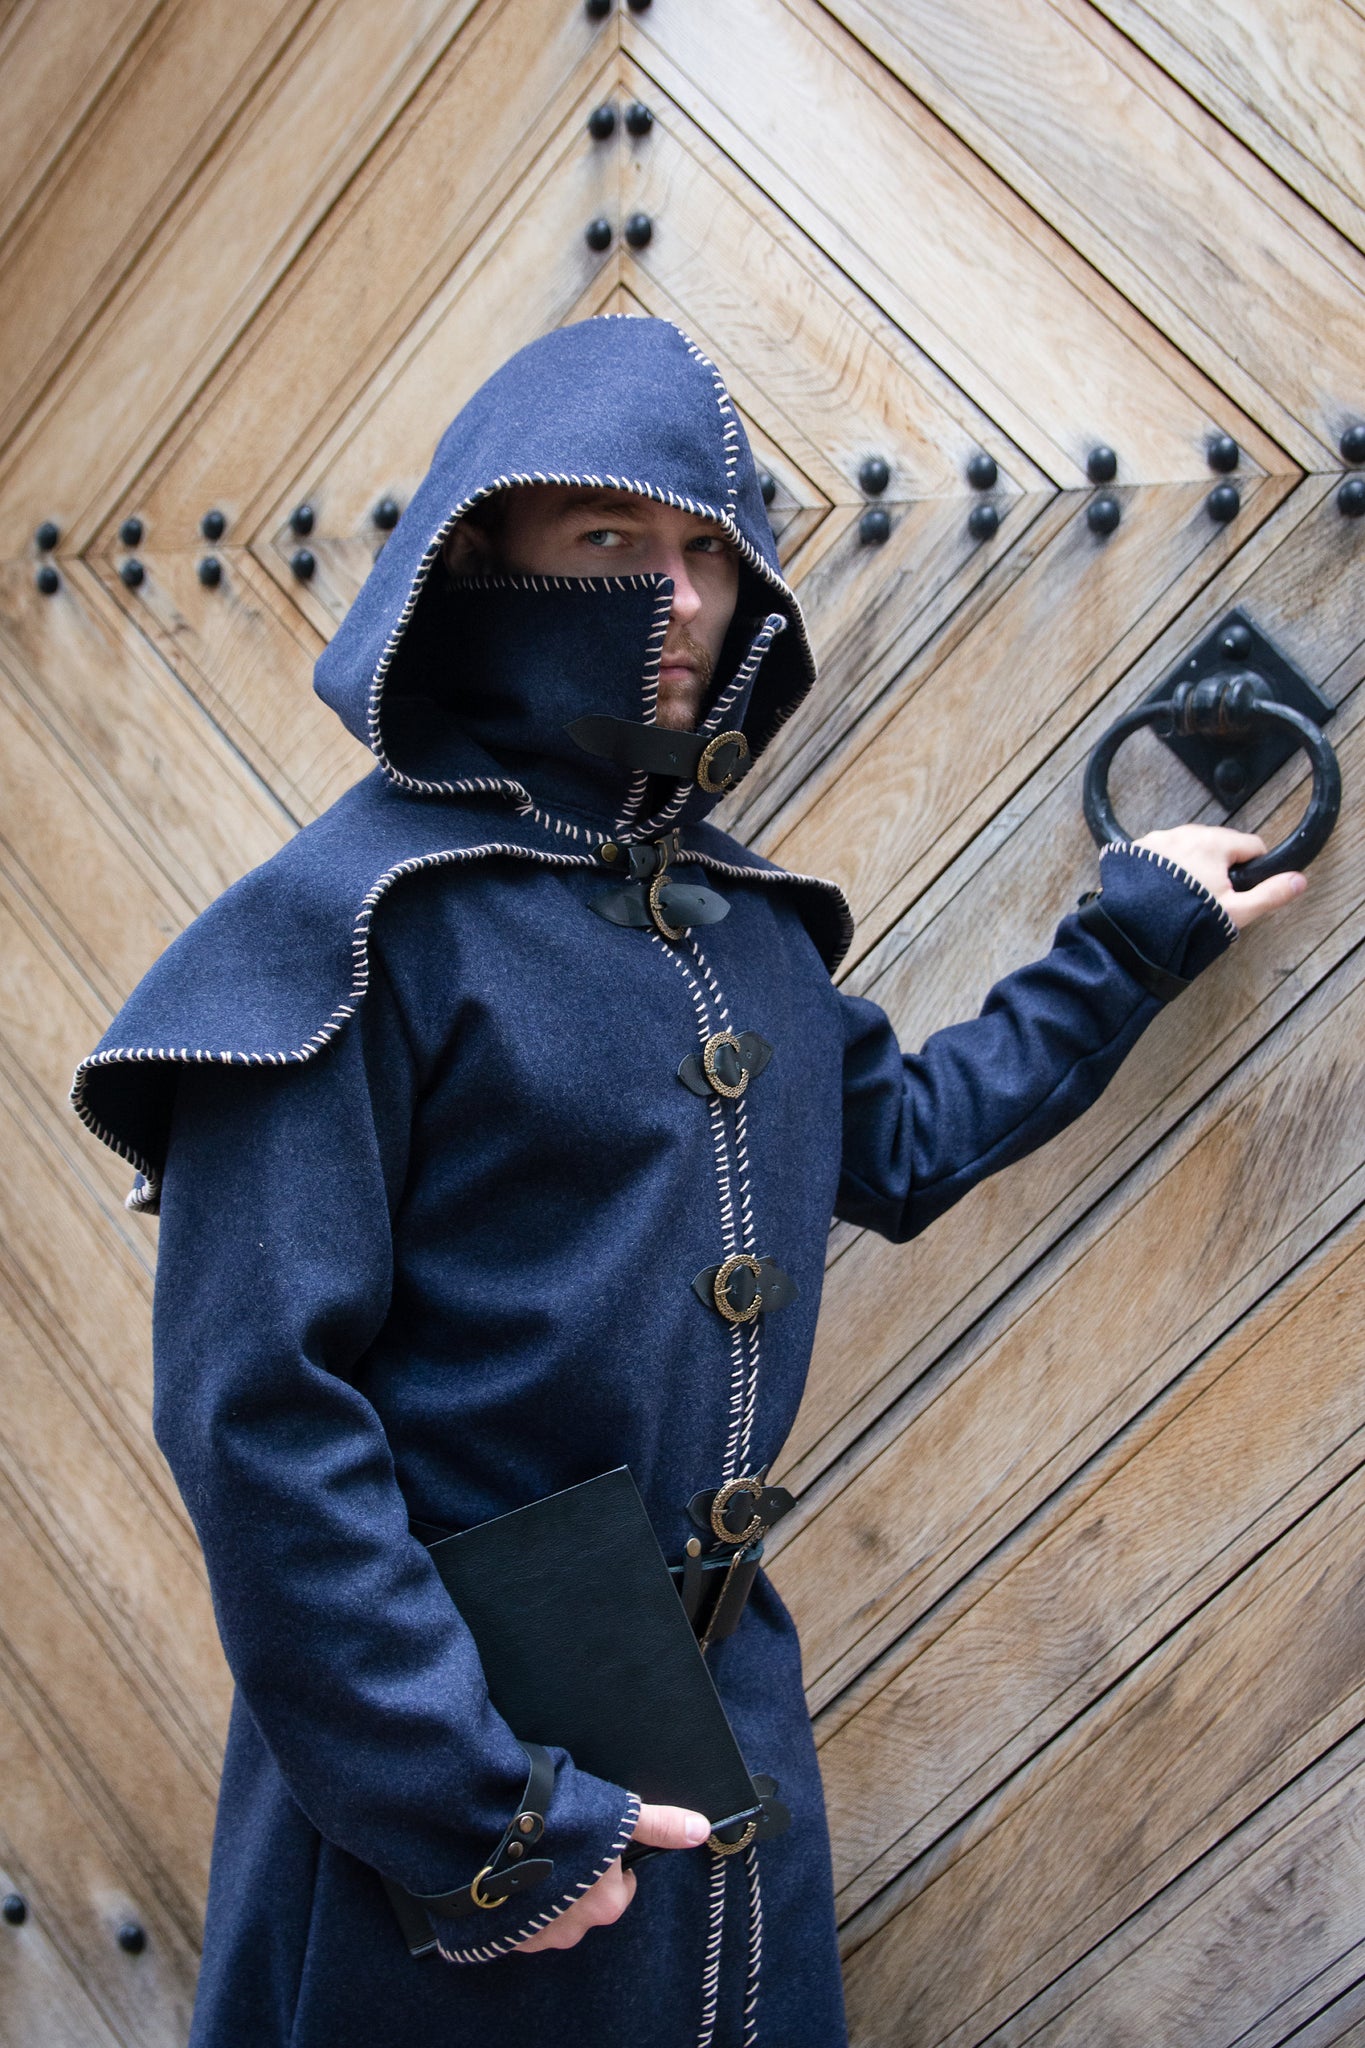 Assassin Costume Cultist Outfit Alchemist Adventurer Clothing Medieval Coat with Hood Fantasy Robe Wizard Mantle